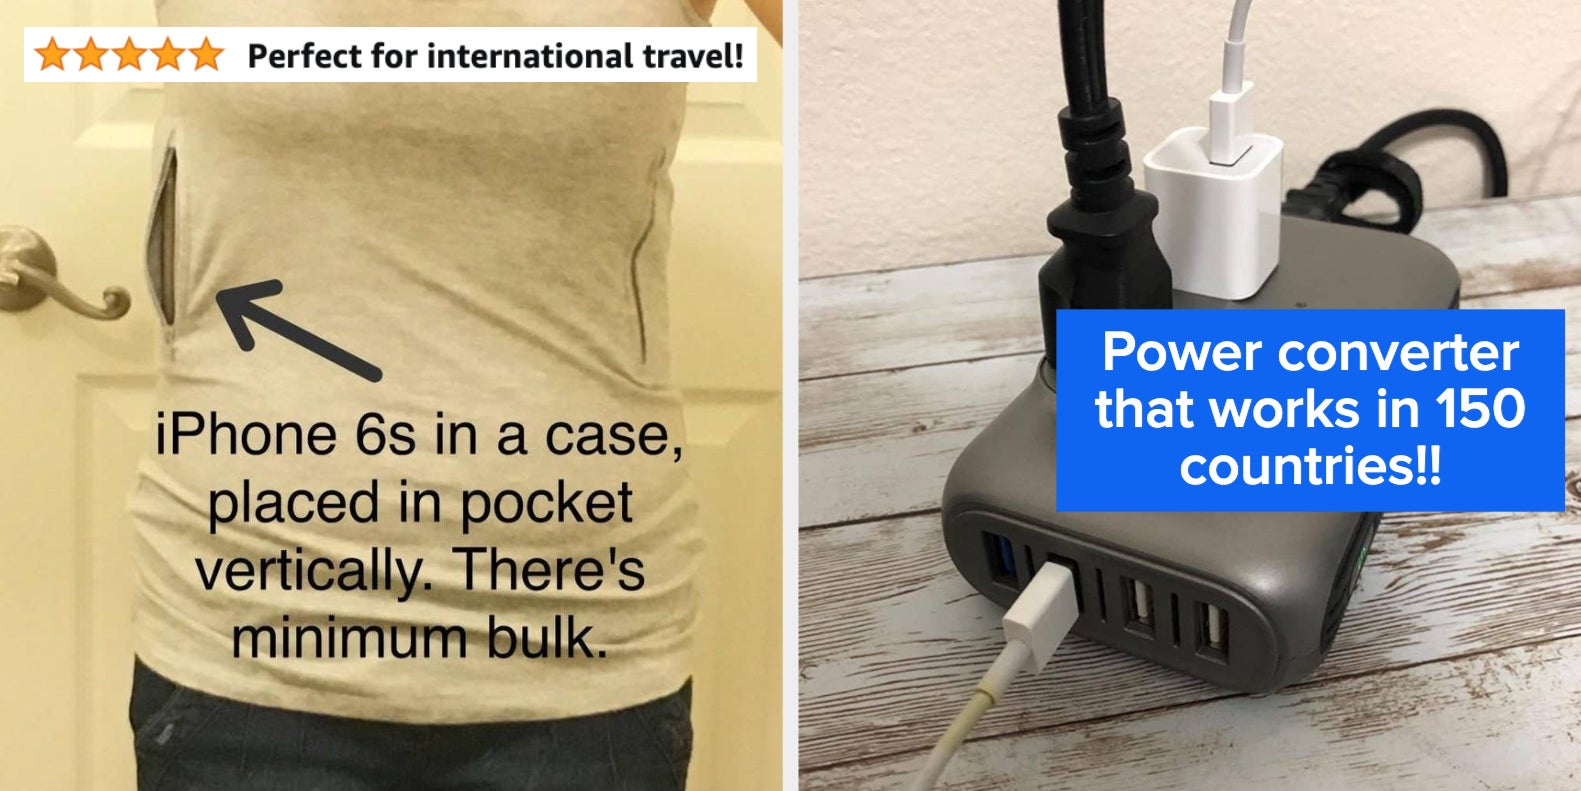 36 Travel Products To Pack For International Trips